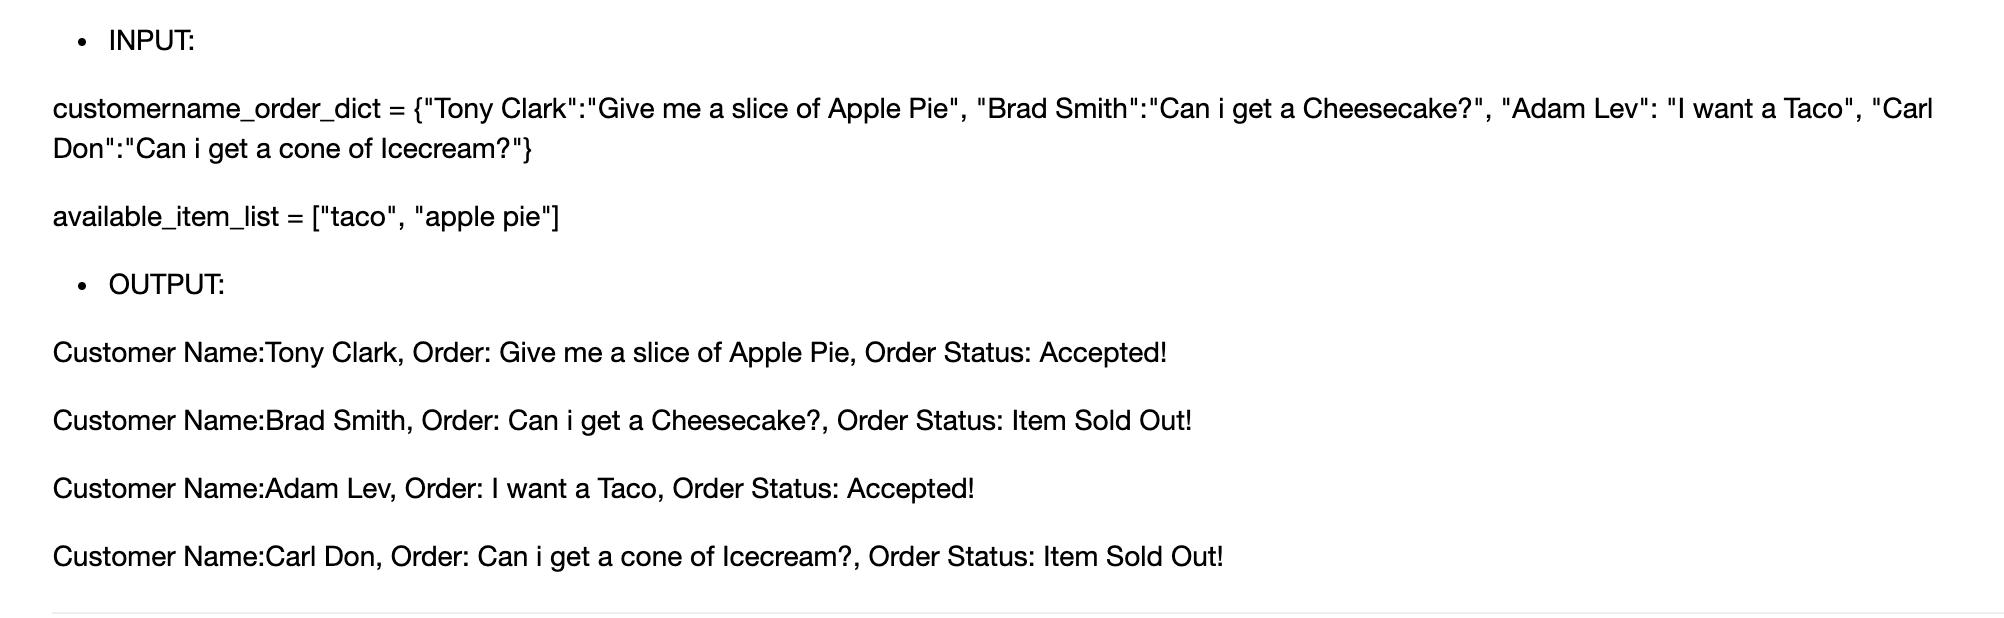 . INPUT: customername_order_dict = {Tony Clark:Give me a slice of Apple Pie, Brad Smith:Can i get a Cheesecake?, Ada